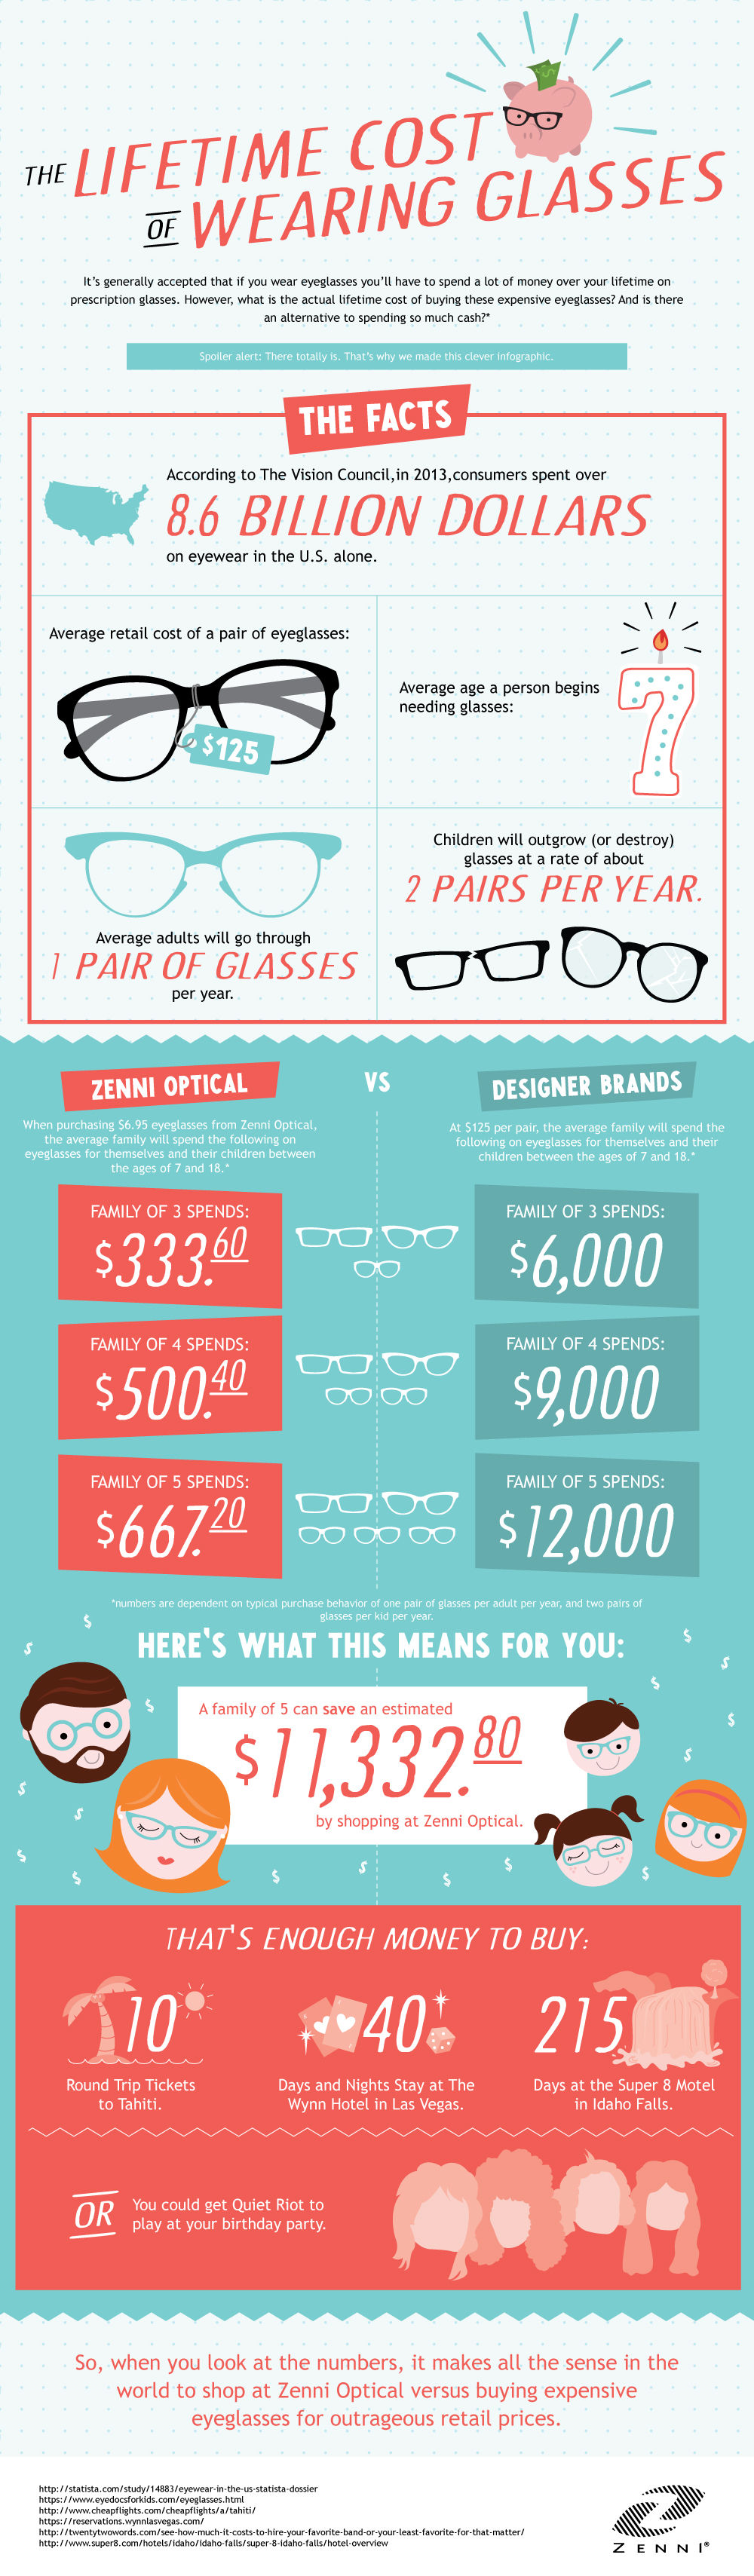 The Lifetime Cost of Wearing Glasses